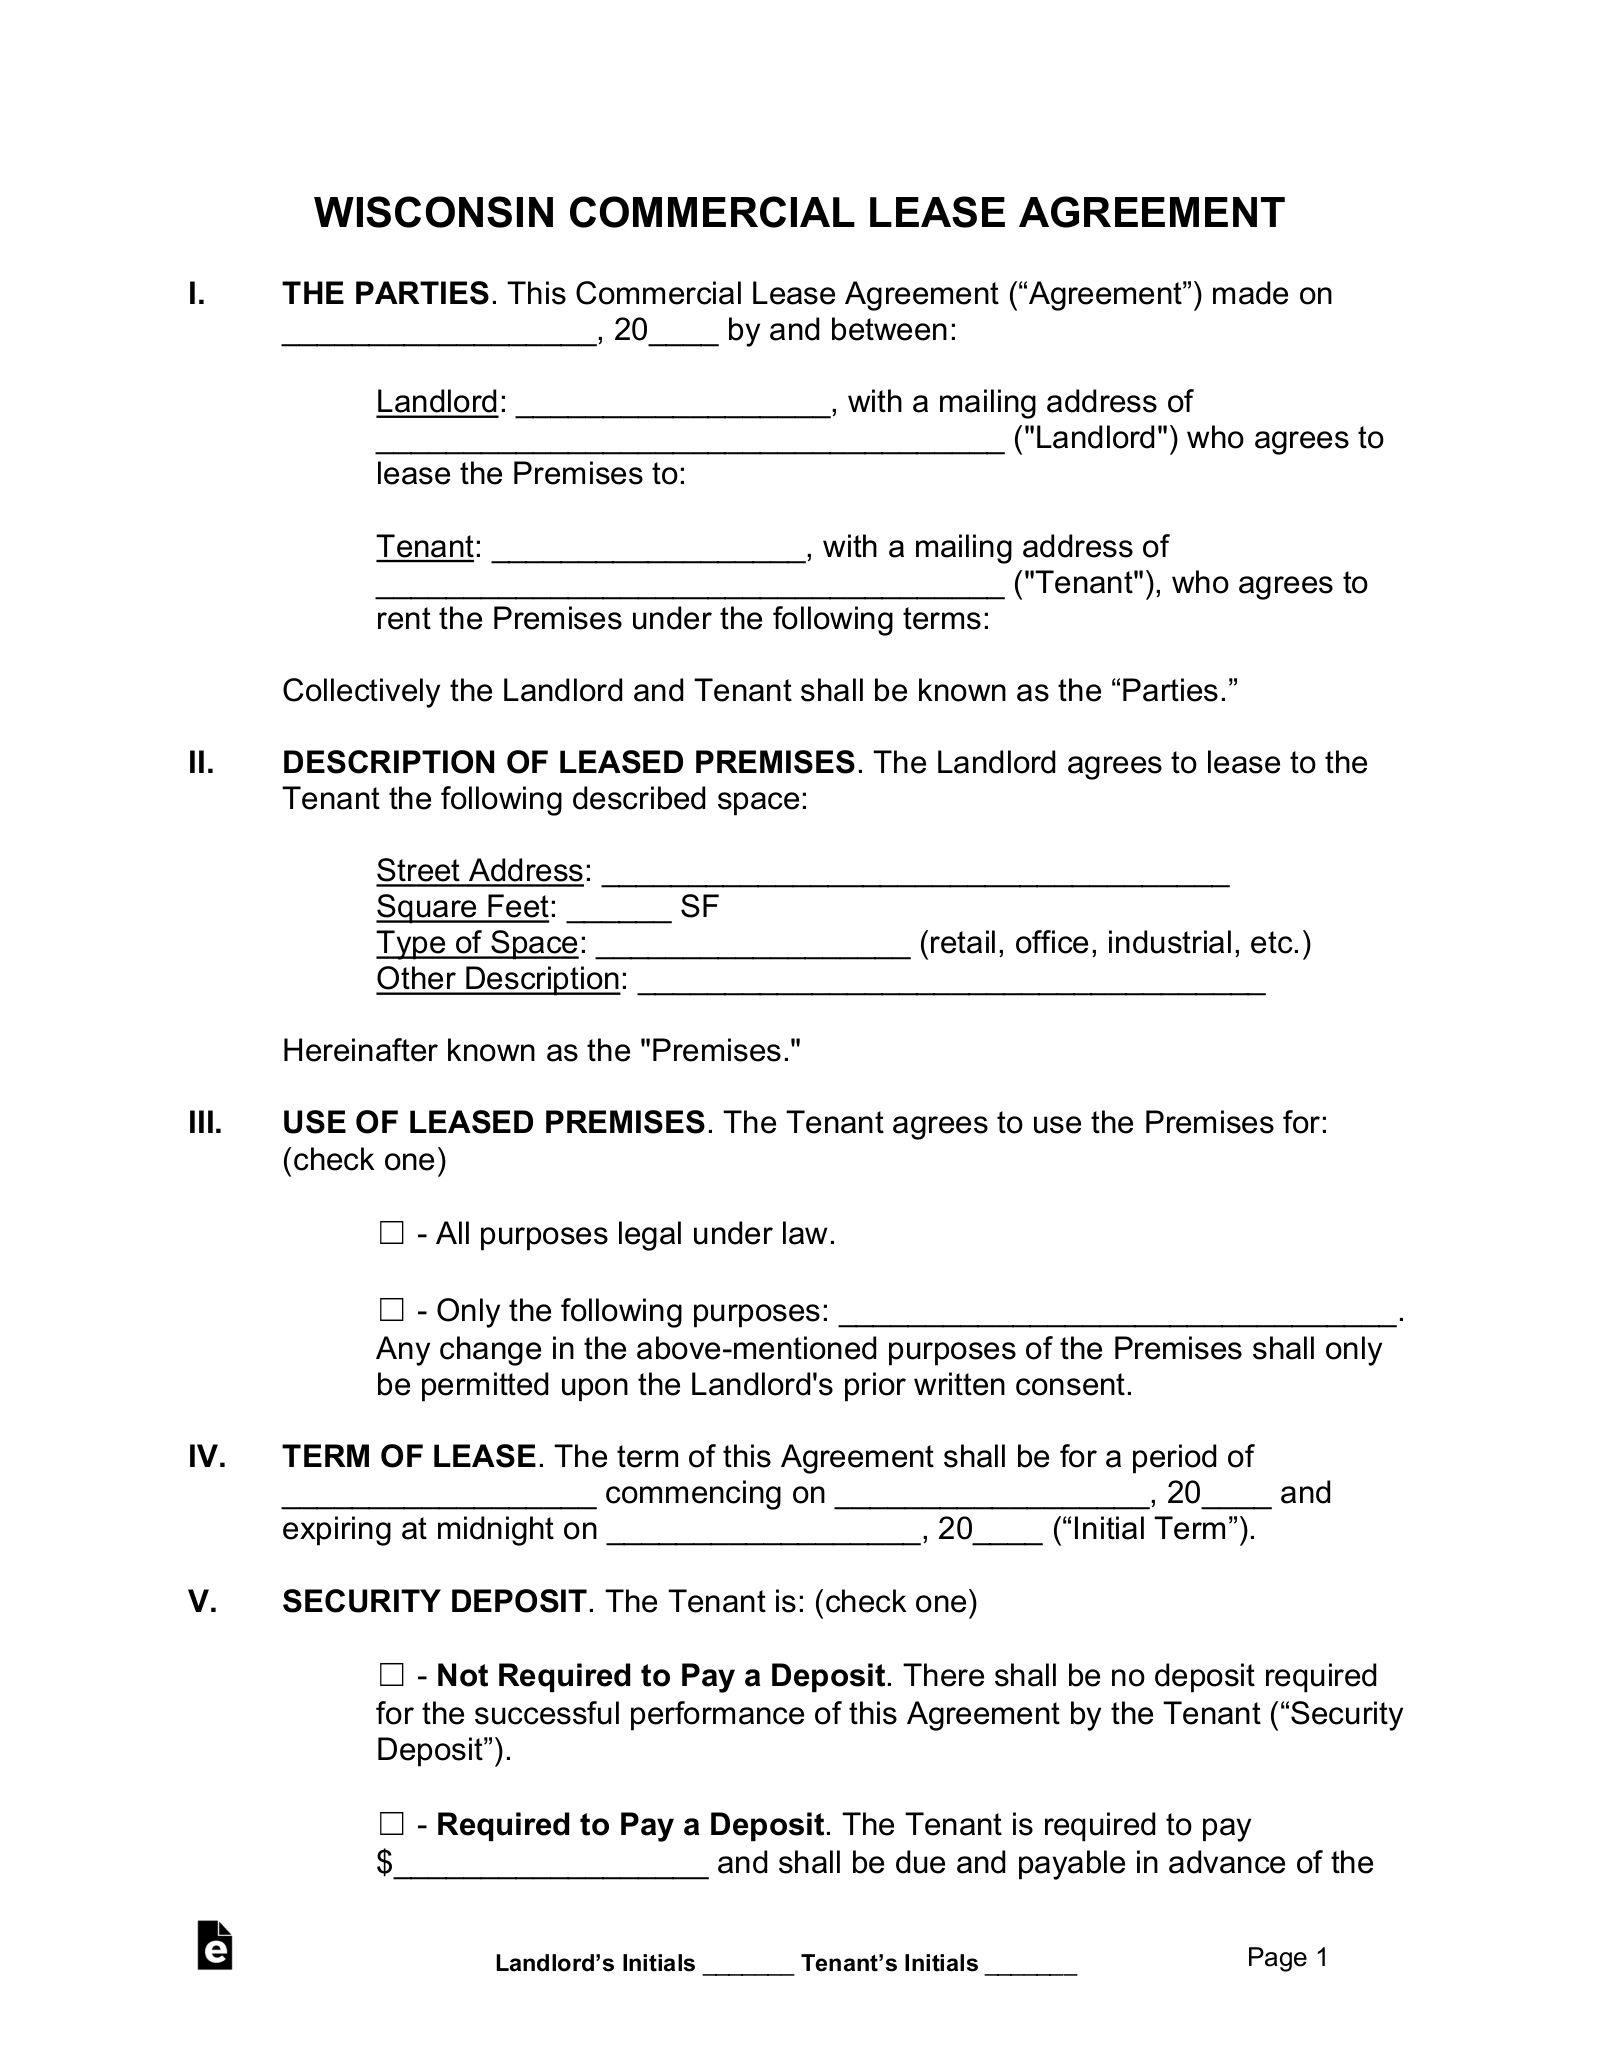 Wisconsin Commercial Lease Agreement Form